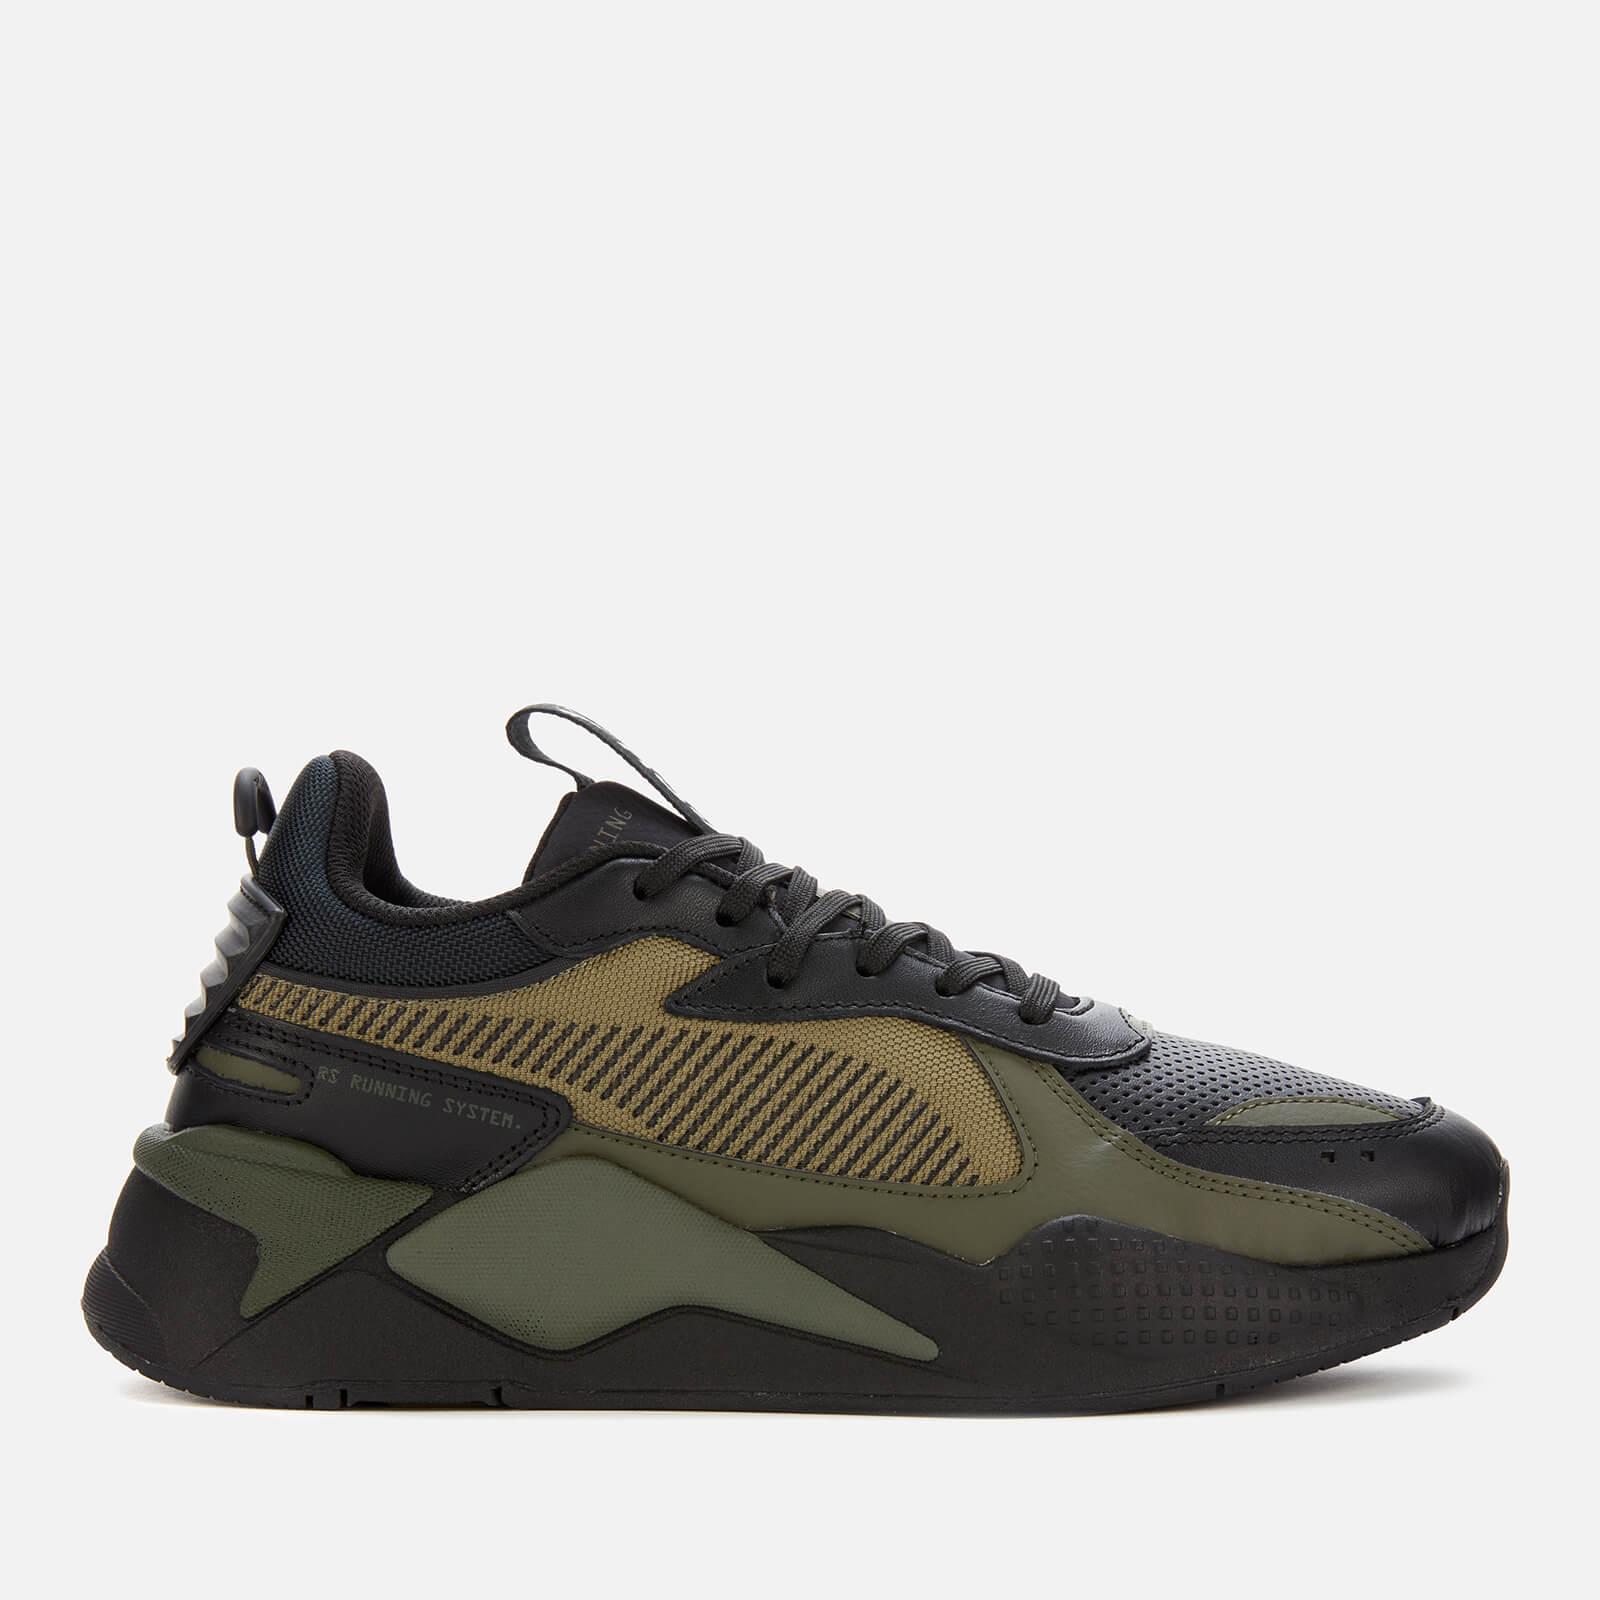 PUMA Leather Rs-x Winterized Sneakers in Black/Burnt Olive (Black) - Save  45% - Lyst